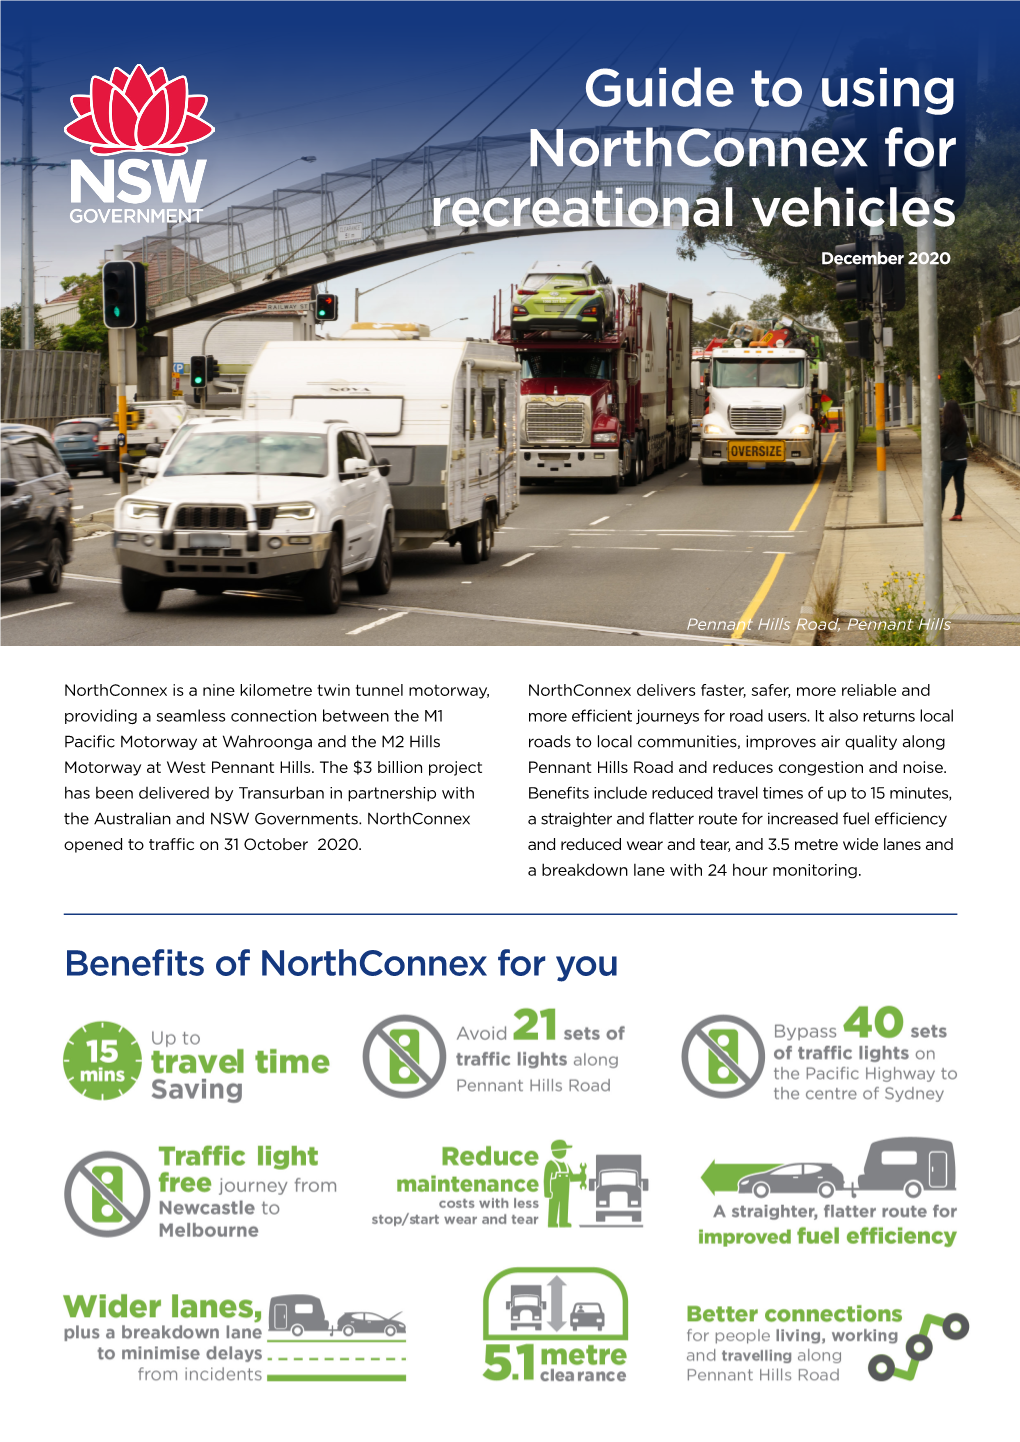 Guide to Using Northconnex for Recreational Vehicles December 2020